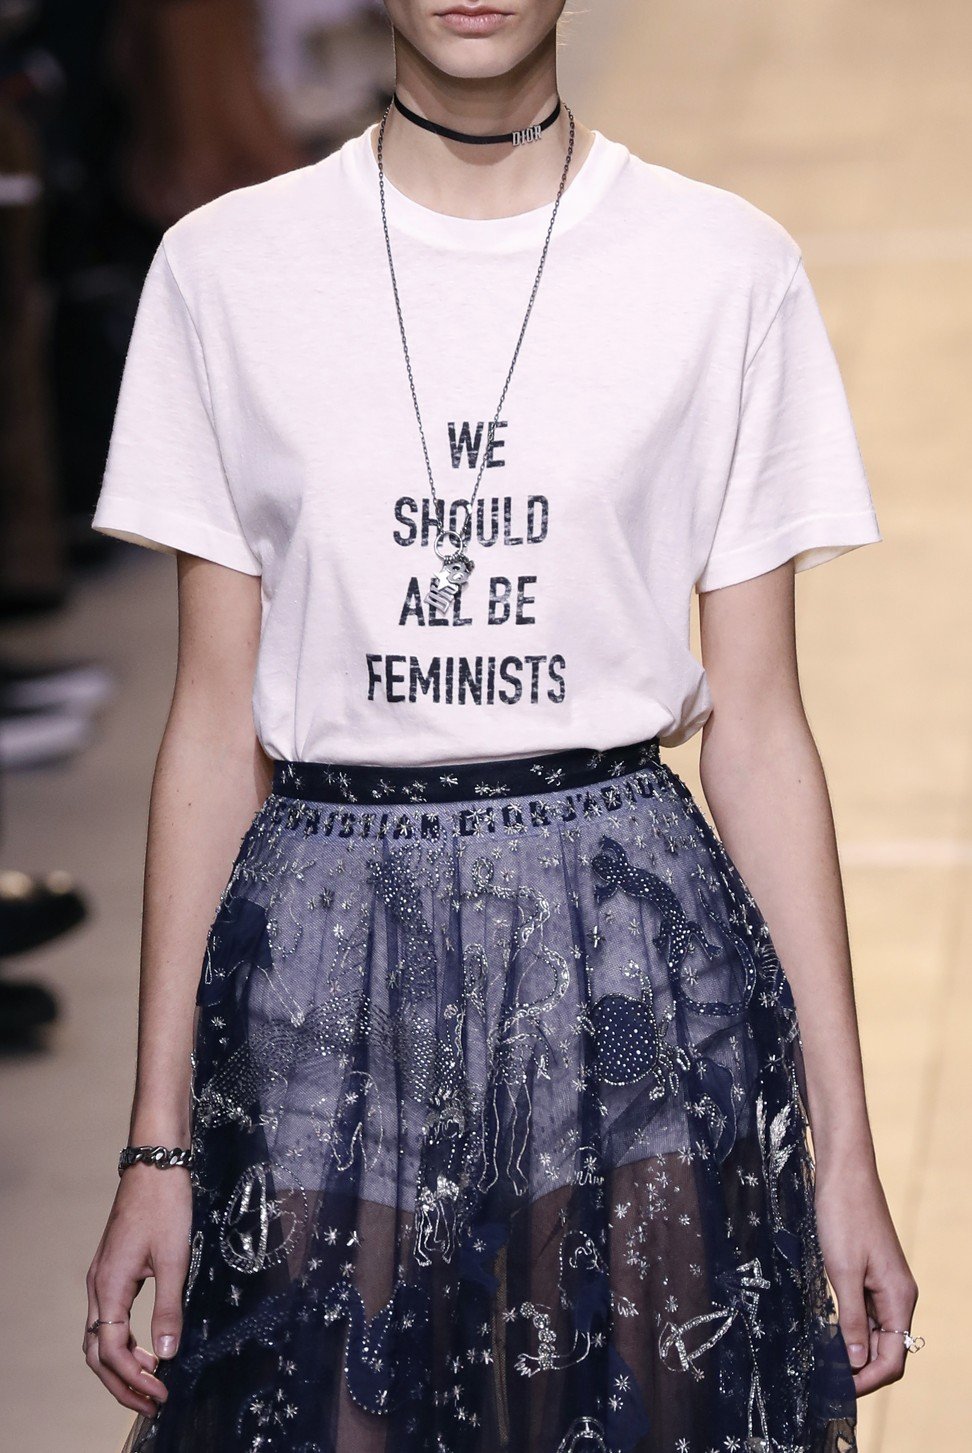 Feminist chic: How Chanel and Dior 